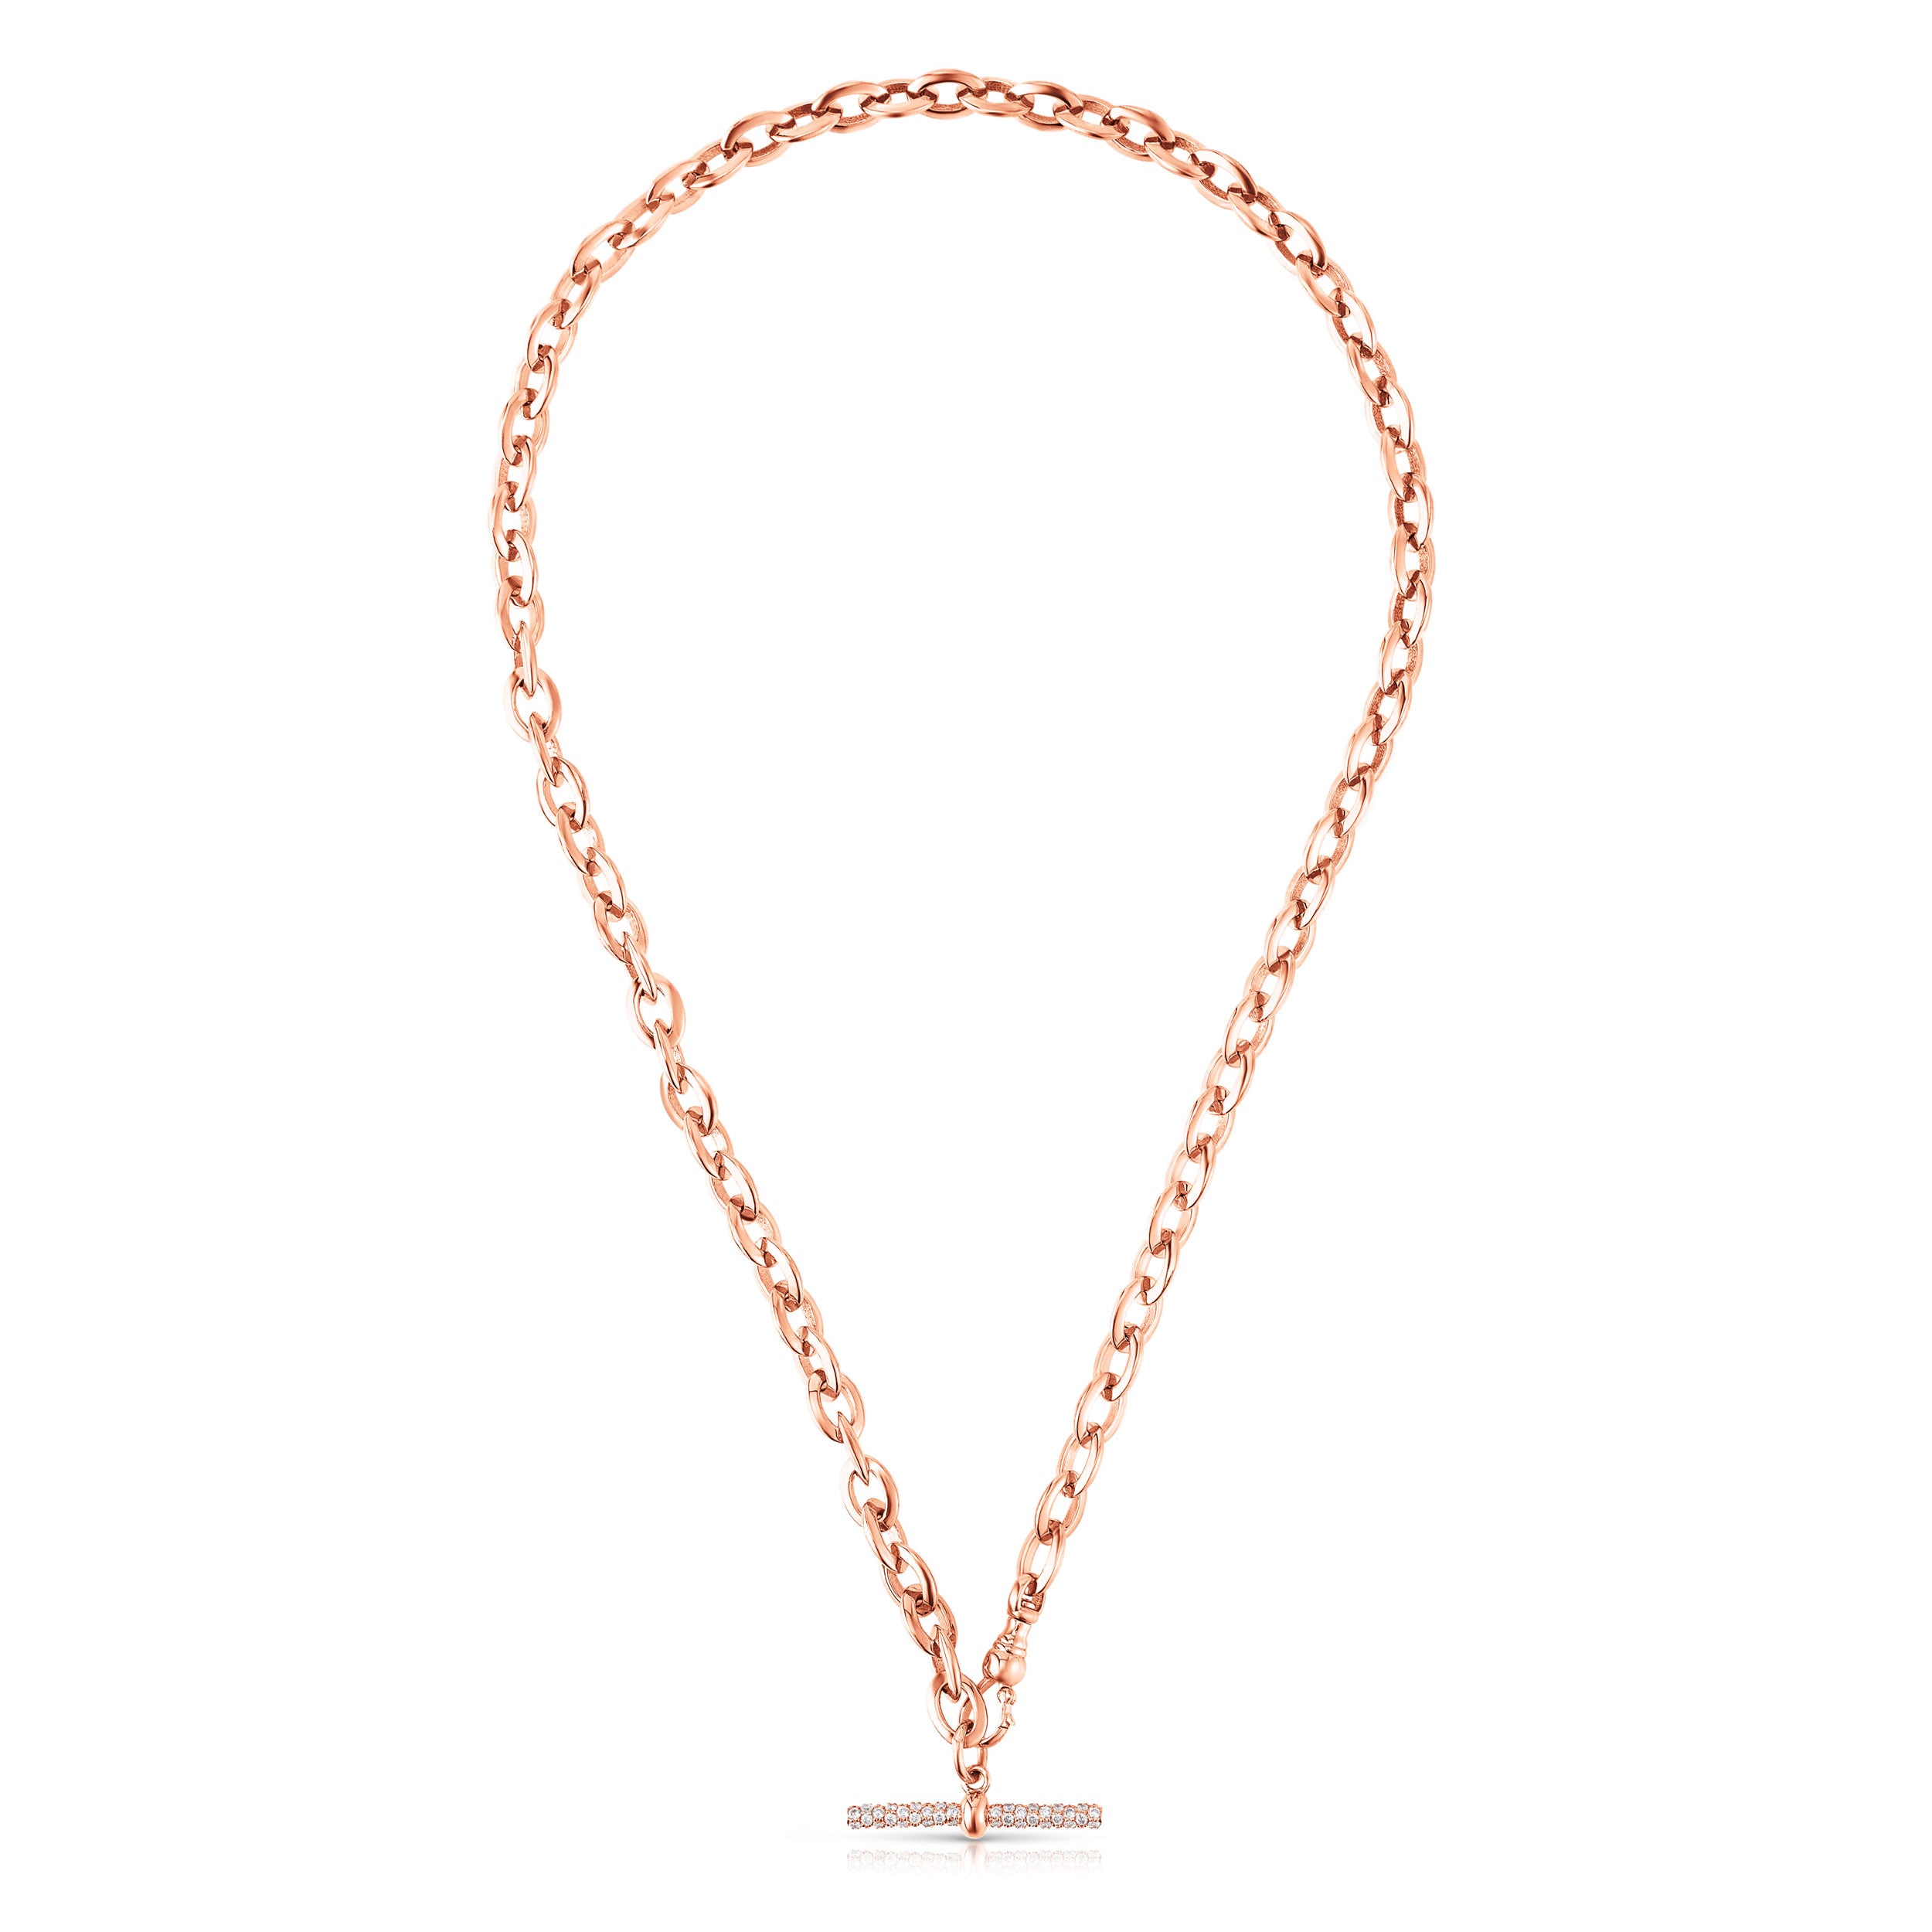 Pantheon Necklace in Rose Gold